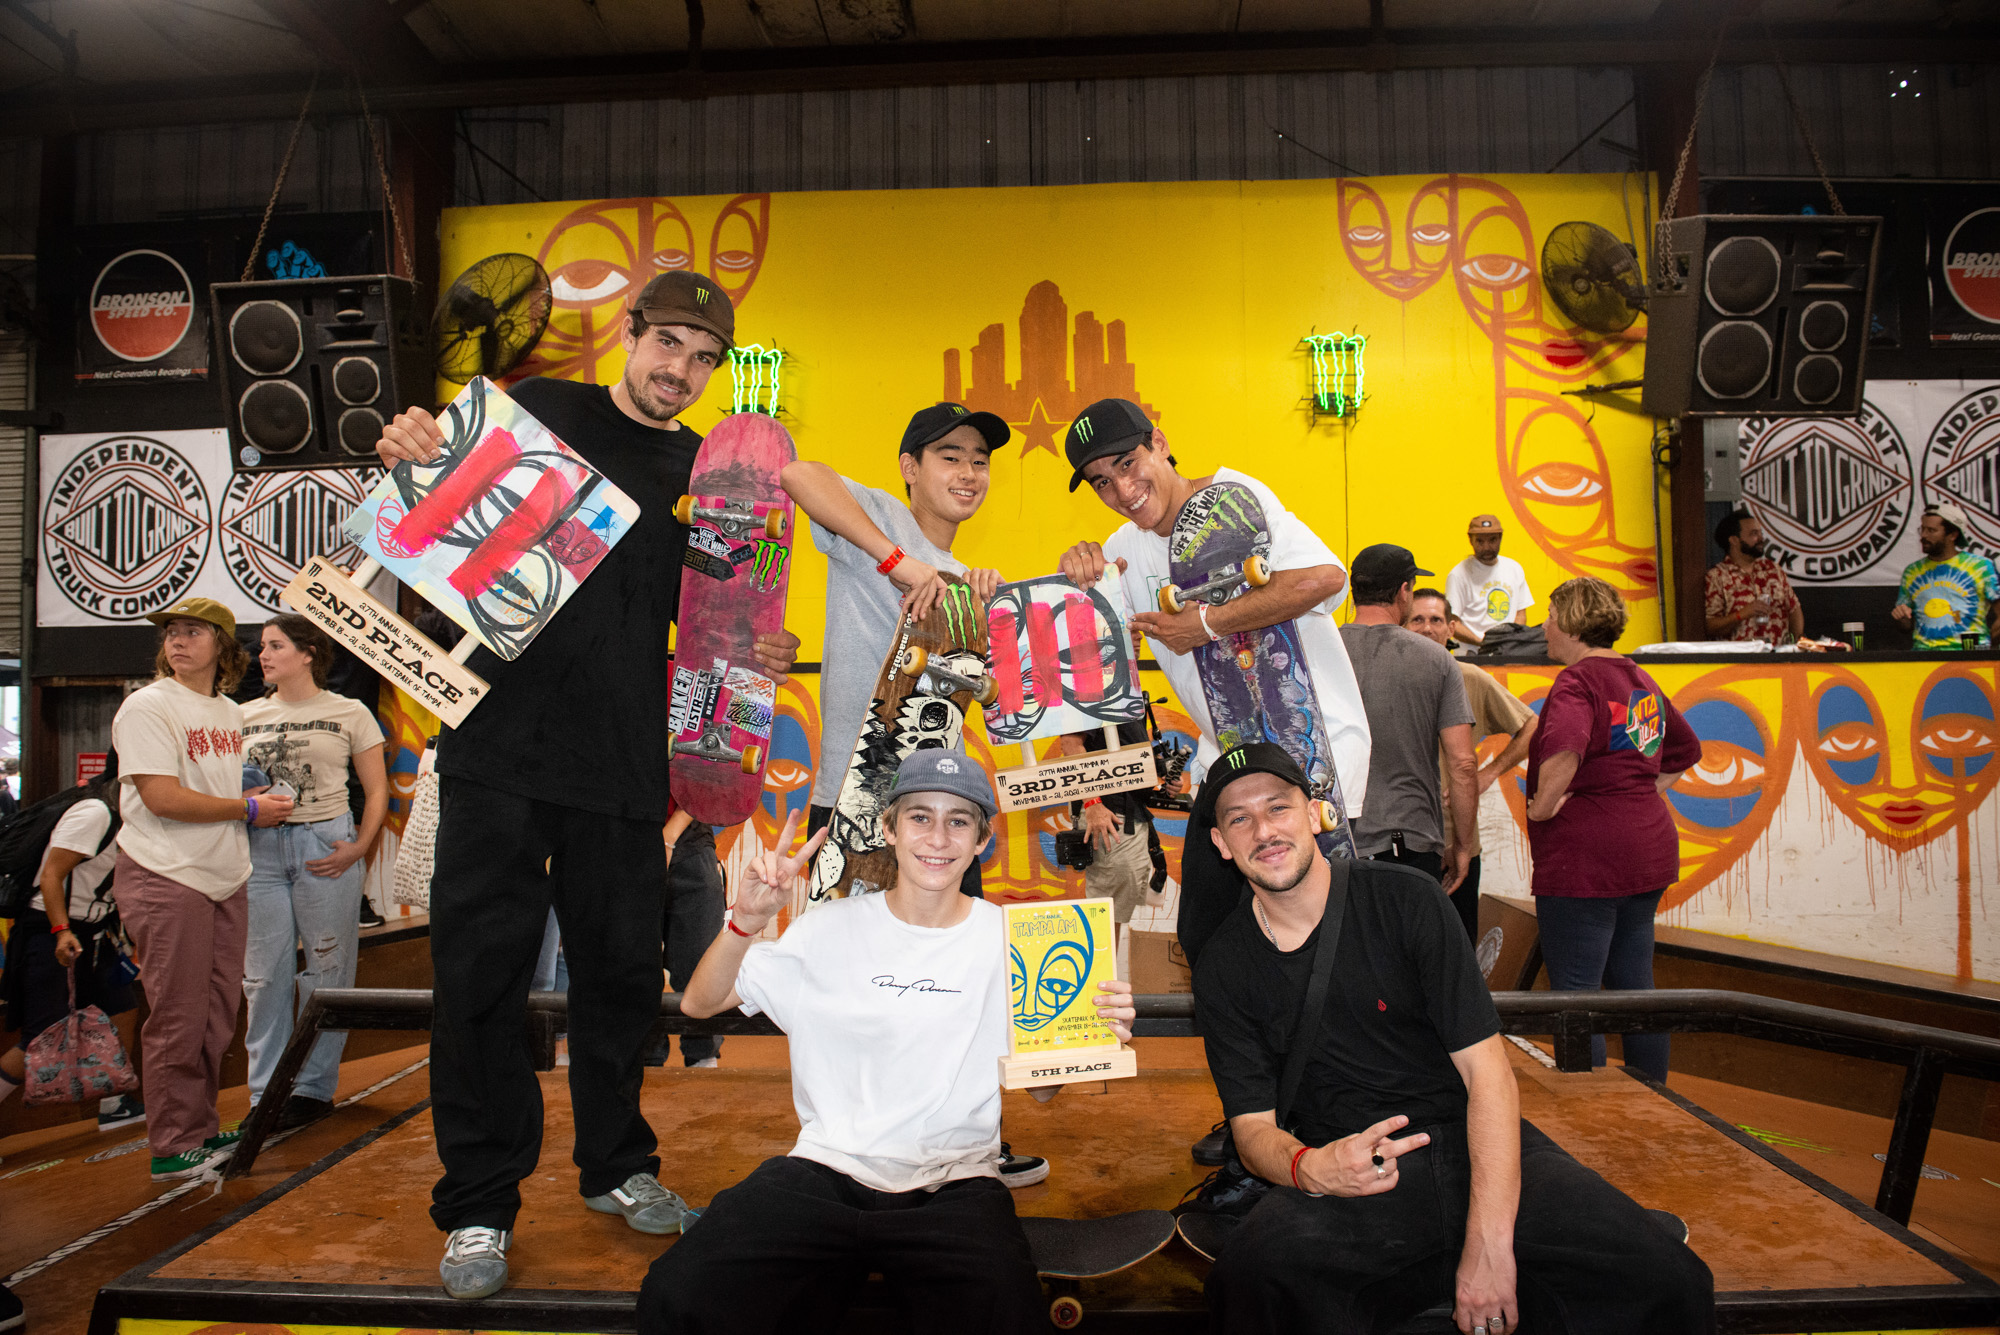 Monster Energy’s Richard Tury and Jhancarlos Gonzalez Take Second and Third Place at 27th Annual Tampa Am Skateboarding Contest Also in photo Daiki Ikeda, Filipe Mota and Jorge Simoes.